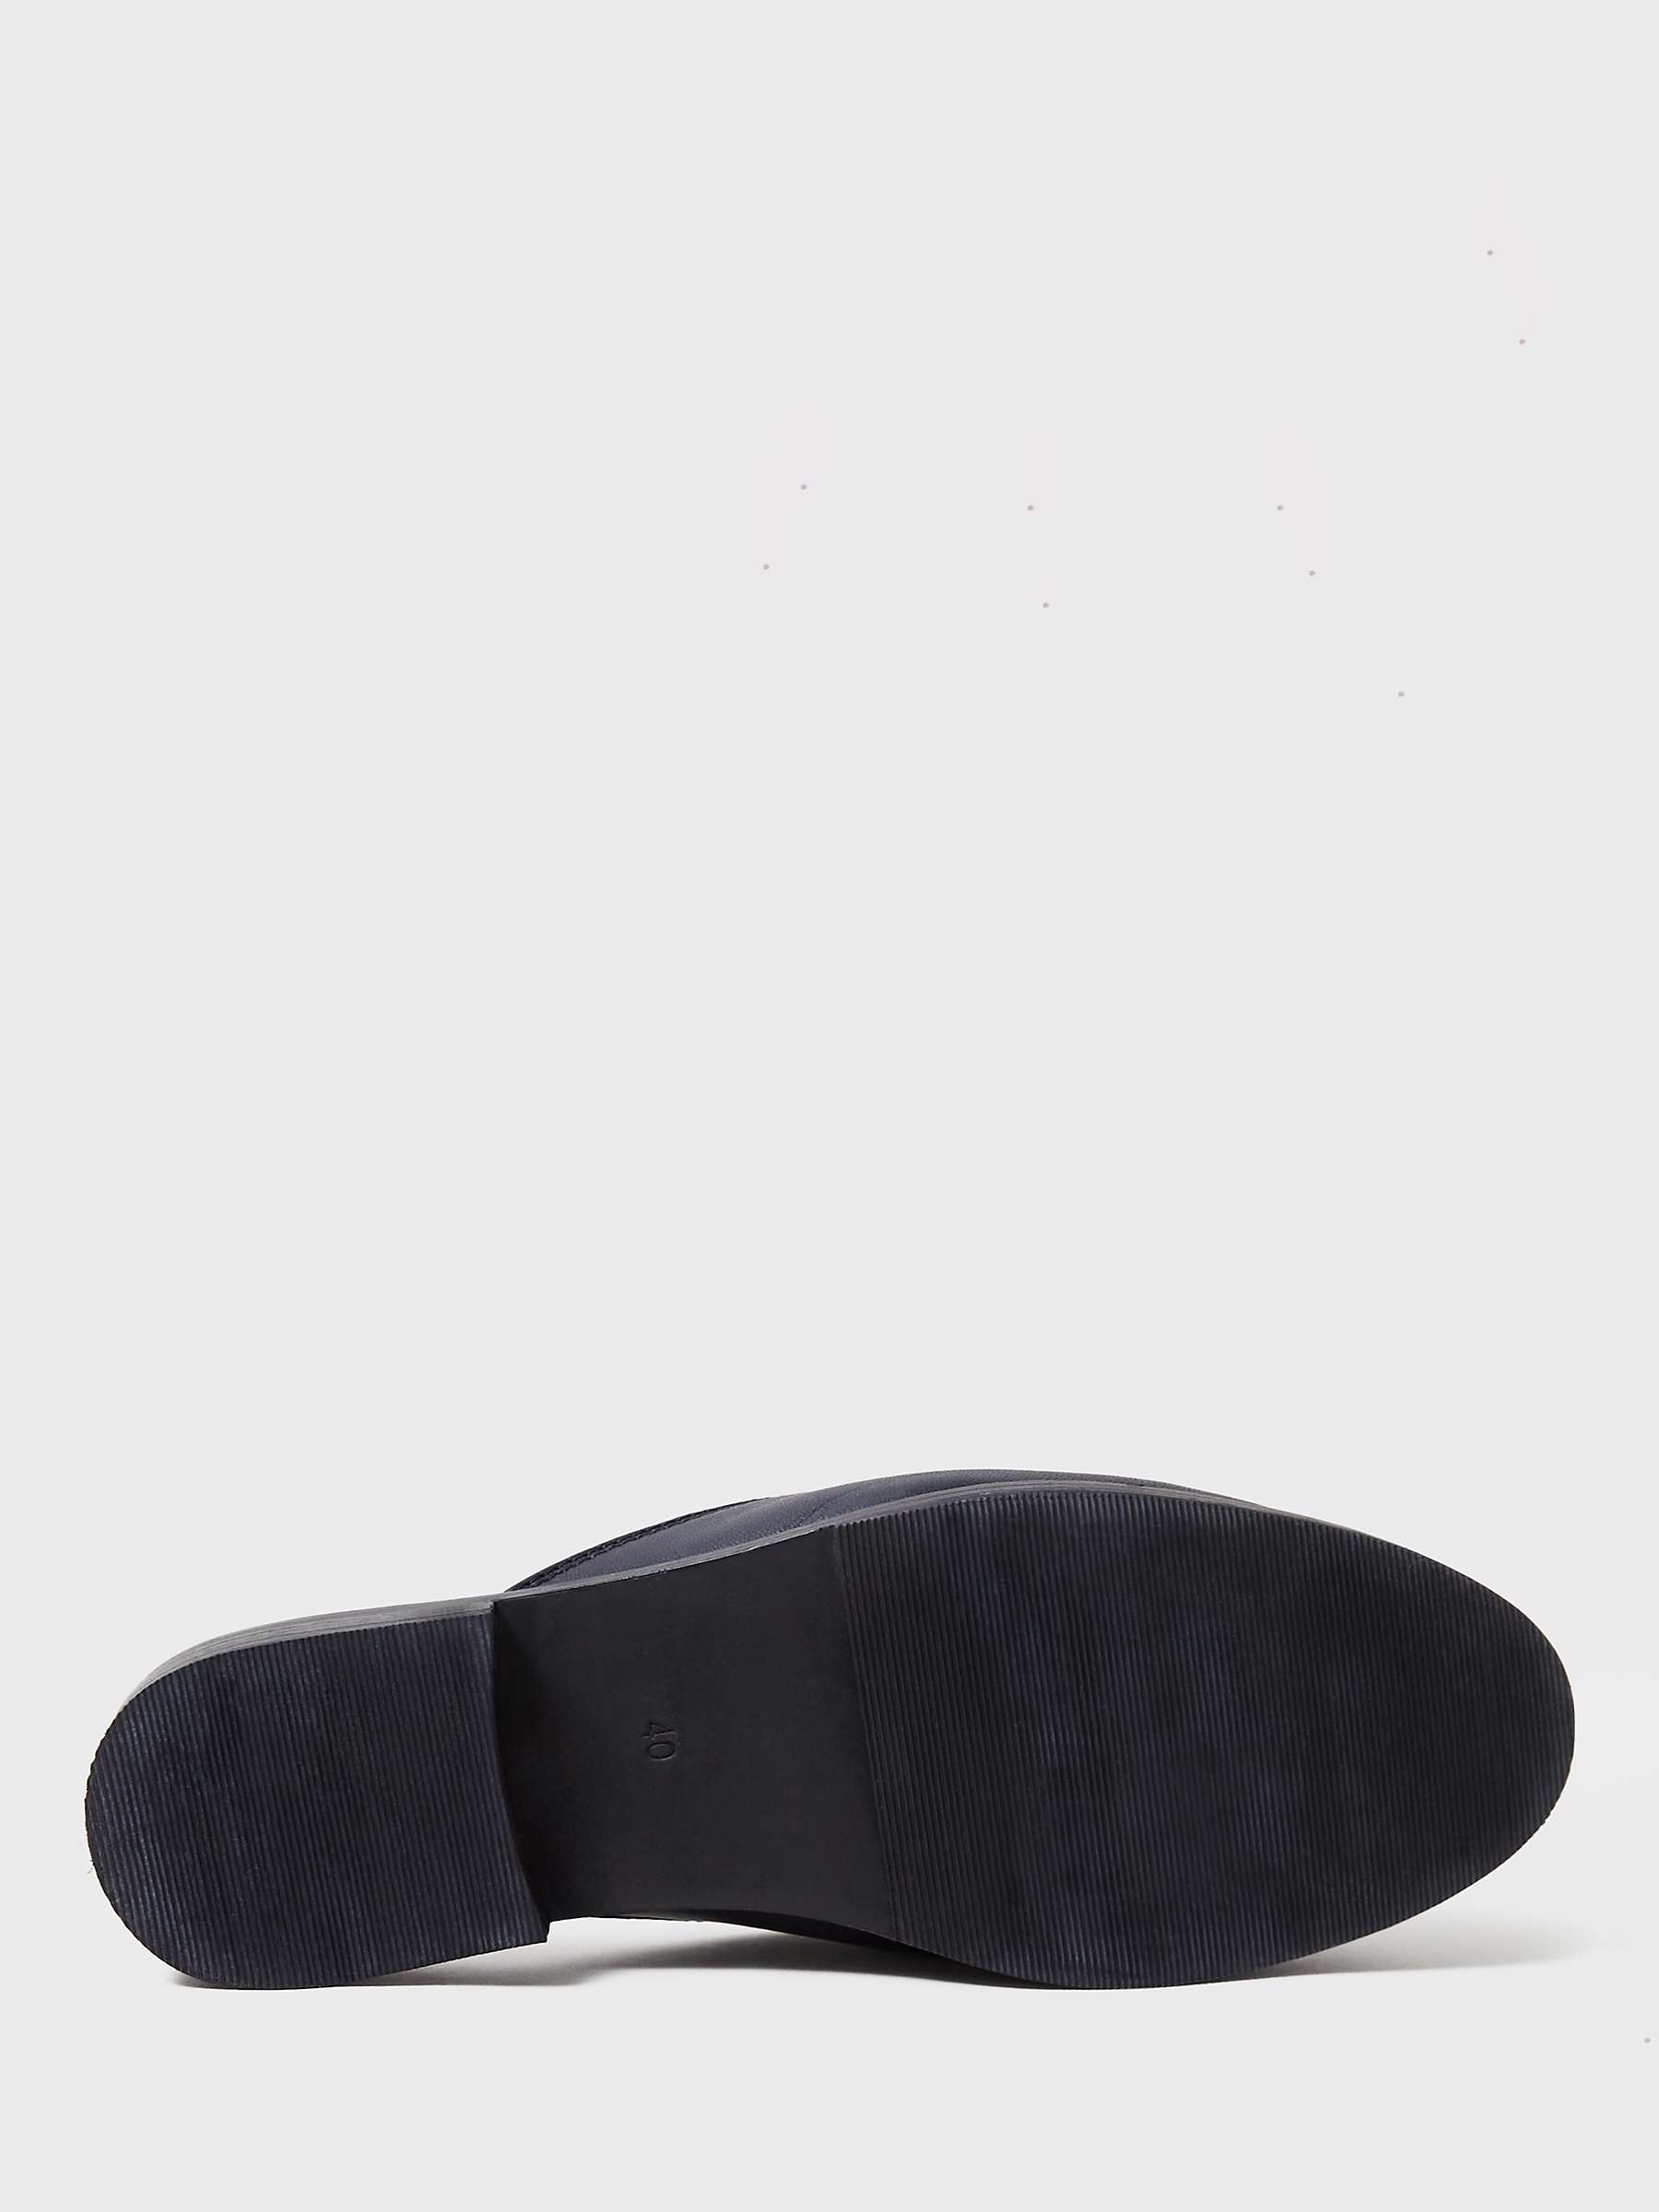 Buy Crew Clothing Leather Backless Loafers, Navy Online at johnlewis.com